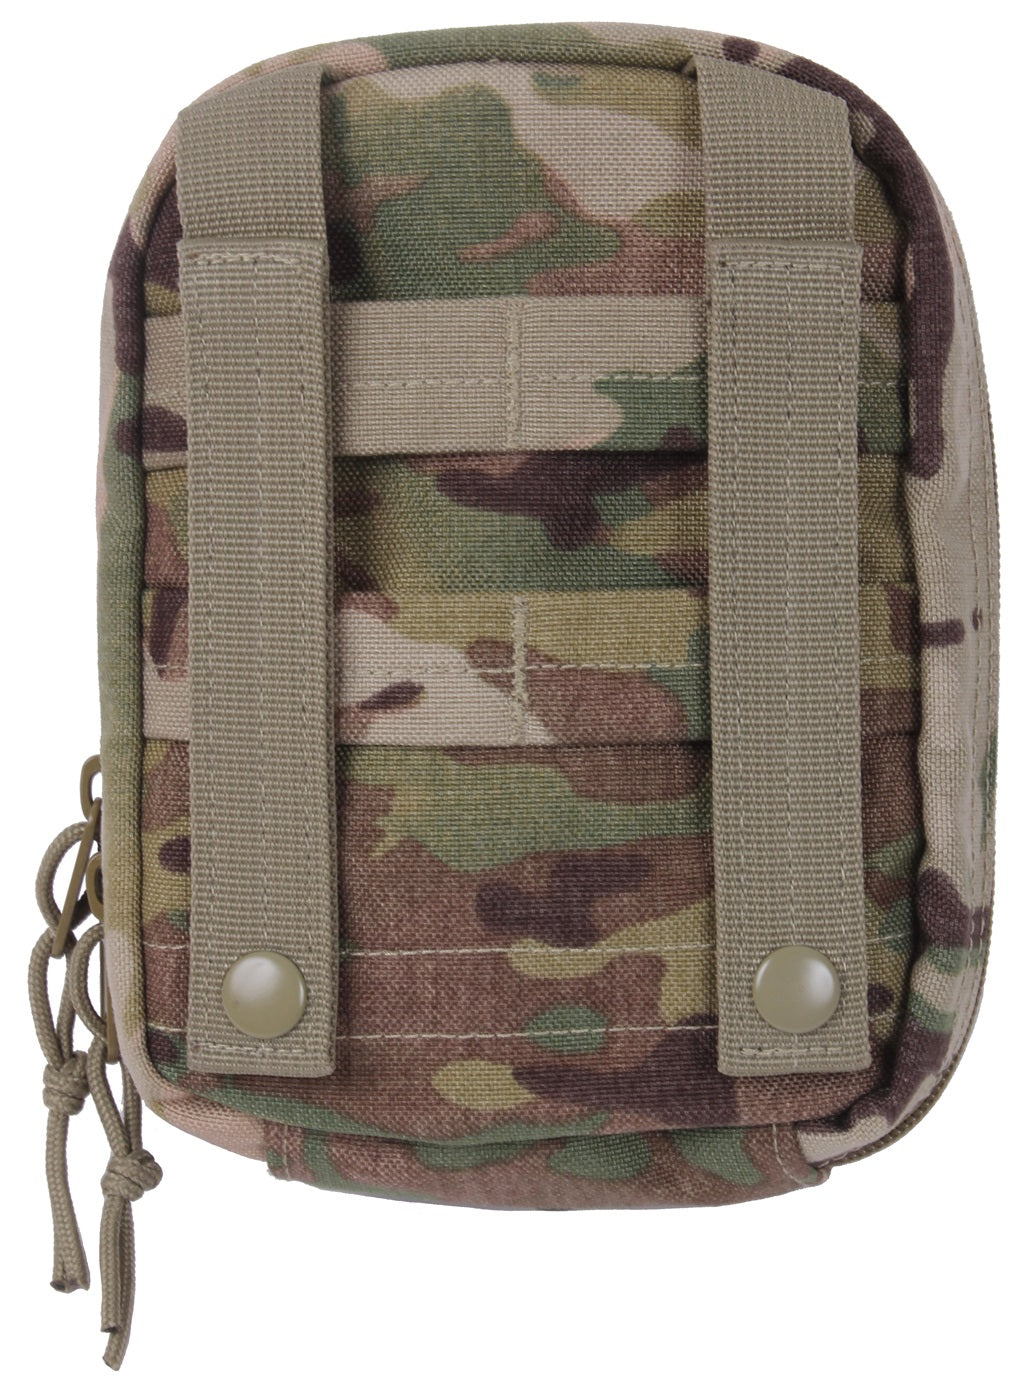 Rothco MOLLE Tactical First Aid Kit - MultiCam